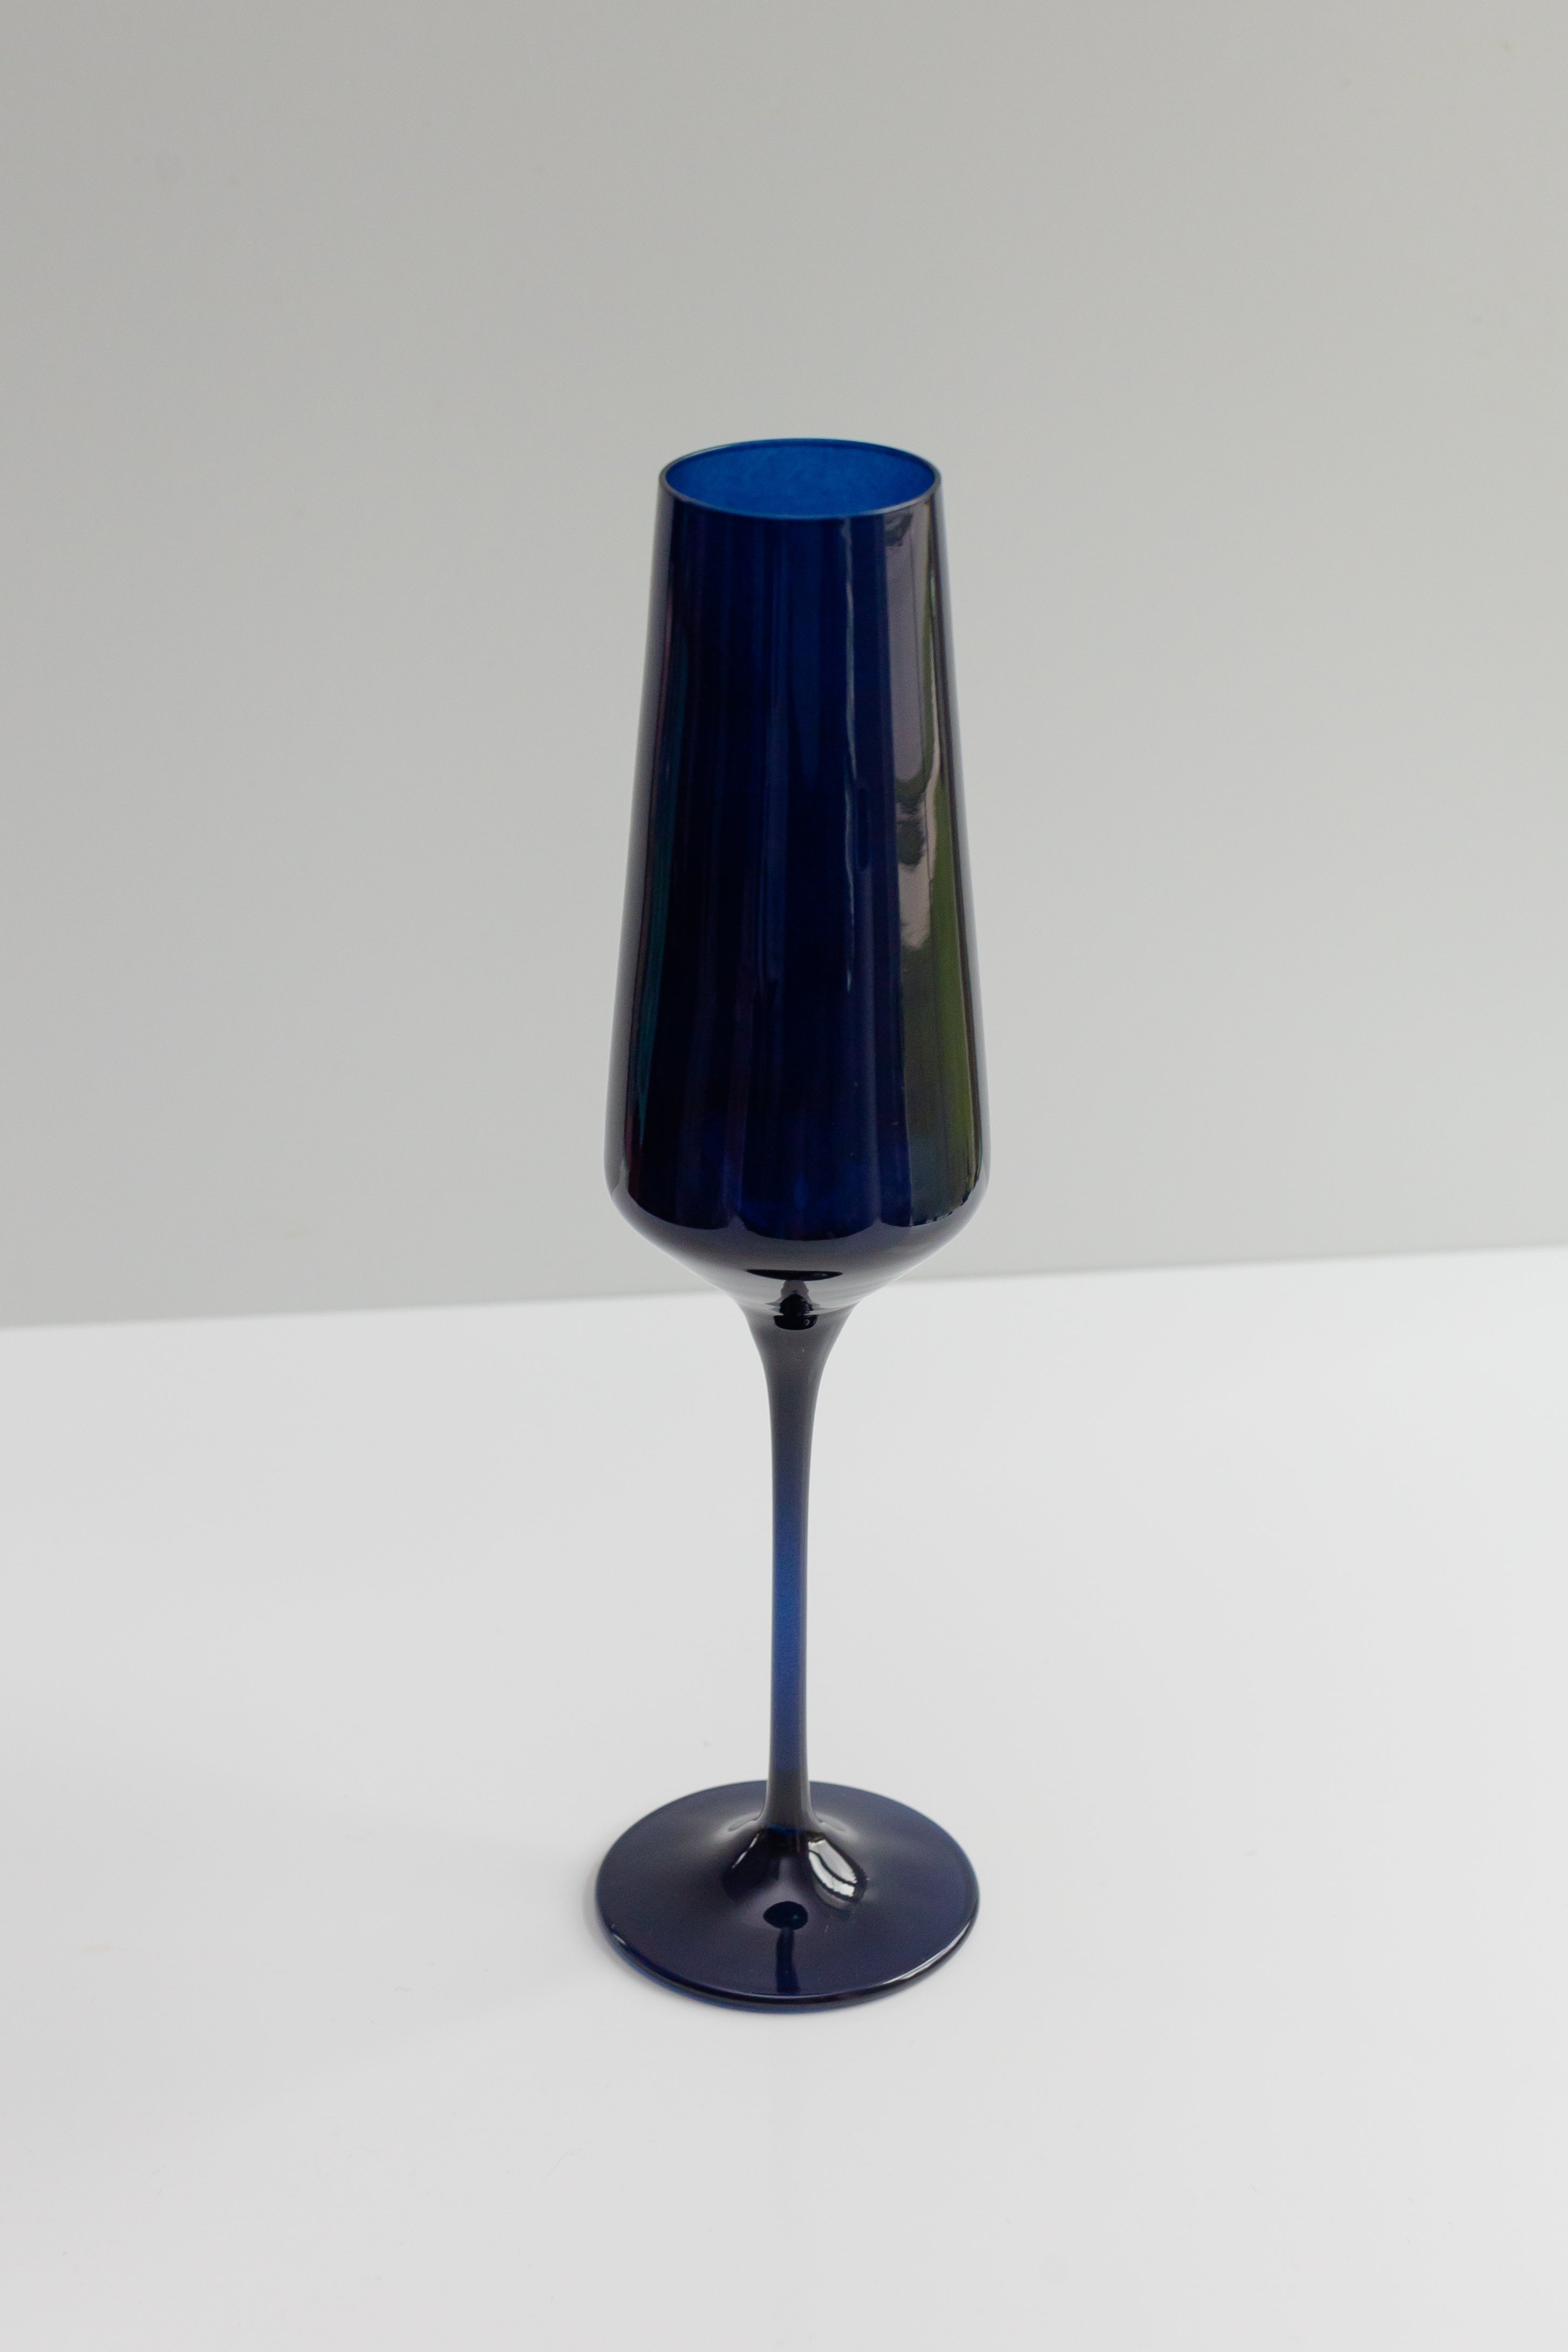 Estelle Colored Champagne Flute - Set of 2 {Midnight Blue}